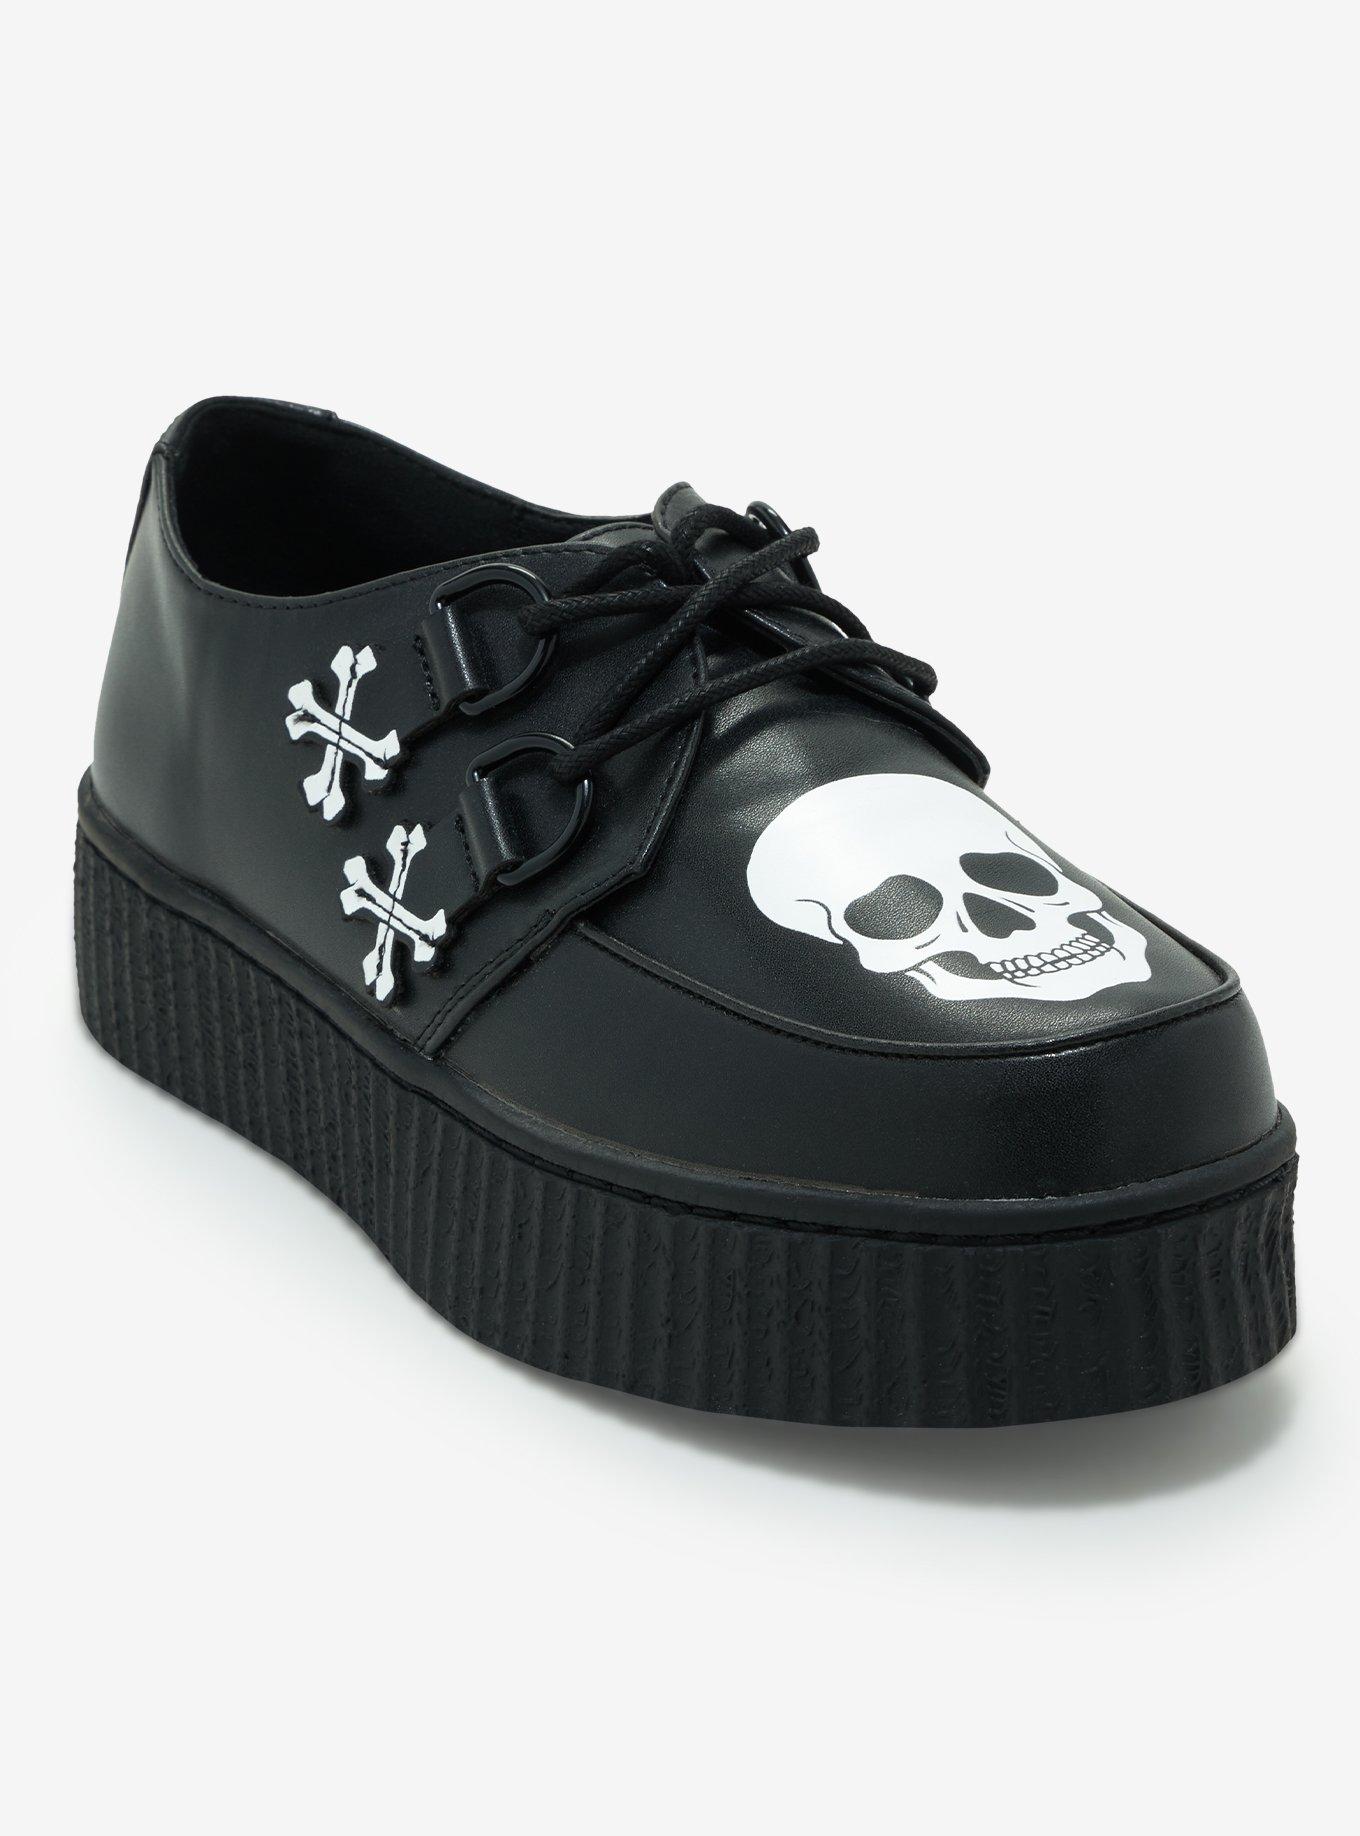 Creepers: Creeper Shoes & Plaform Creepers | Hot